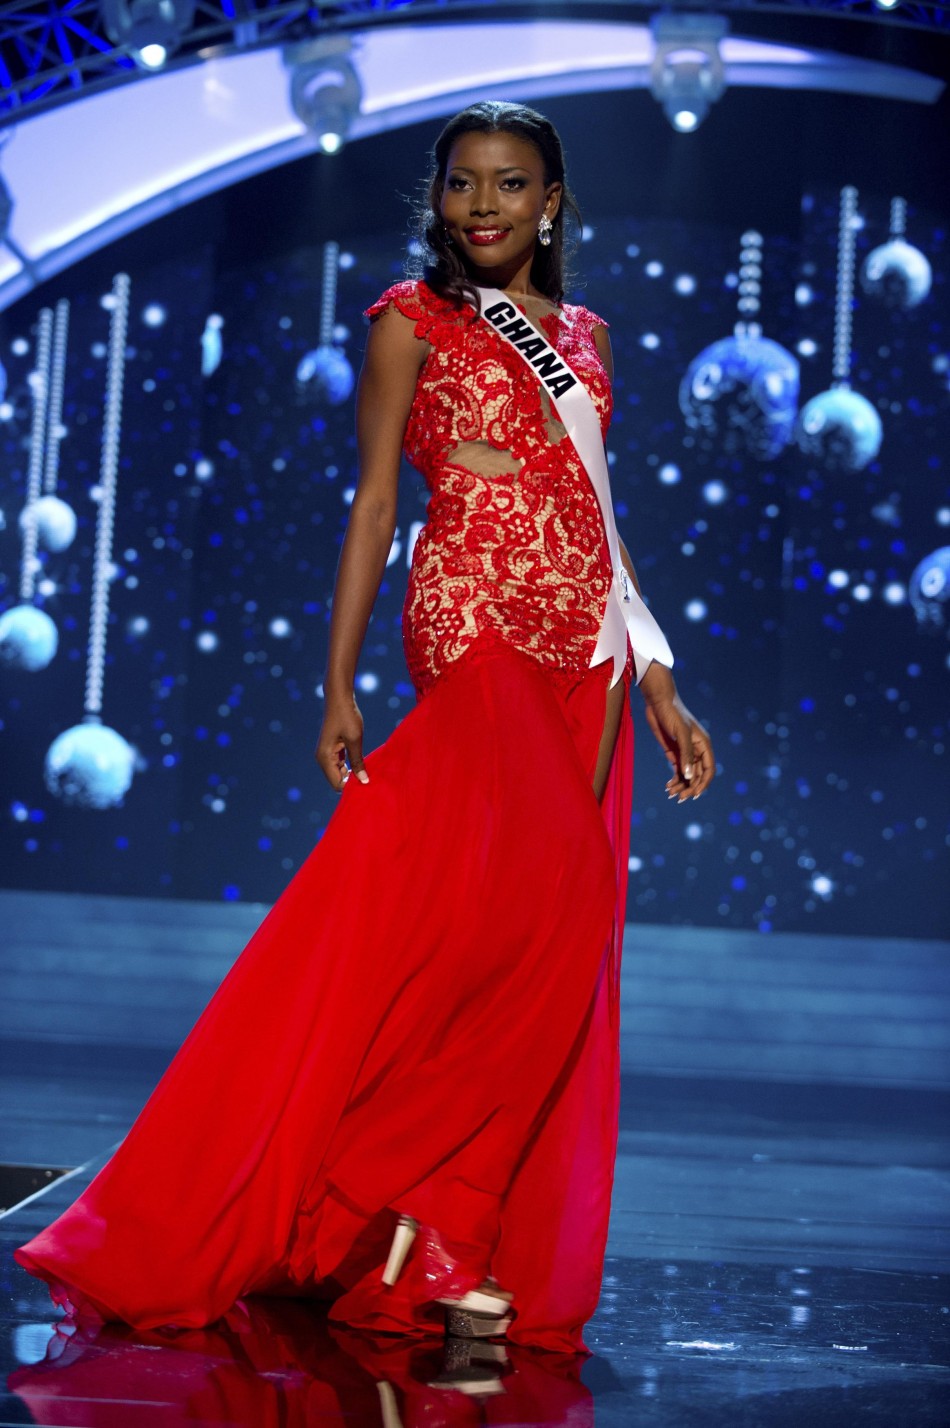 Miss Ghana 2012 Ofori competes in an evening gown of her choice during the Evening Gown Competition of the 2012 Miss Universe Presentation Show in Las Vegas